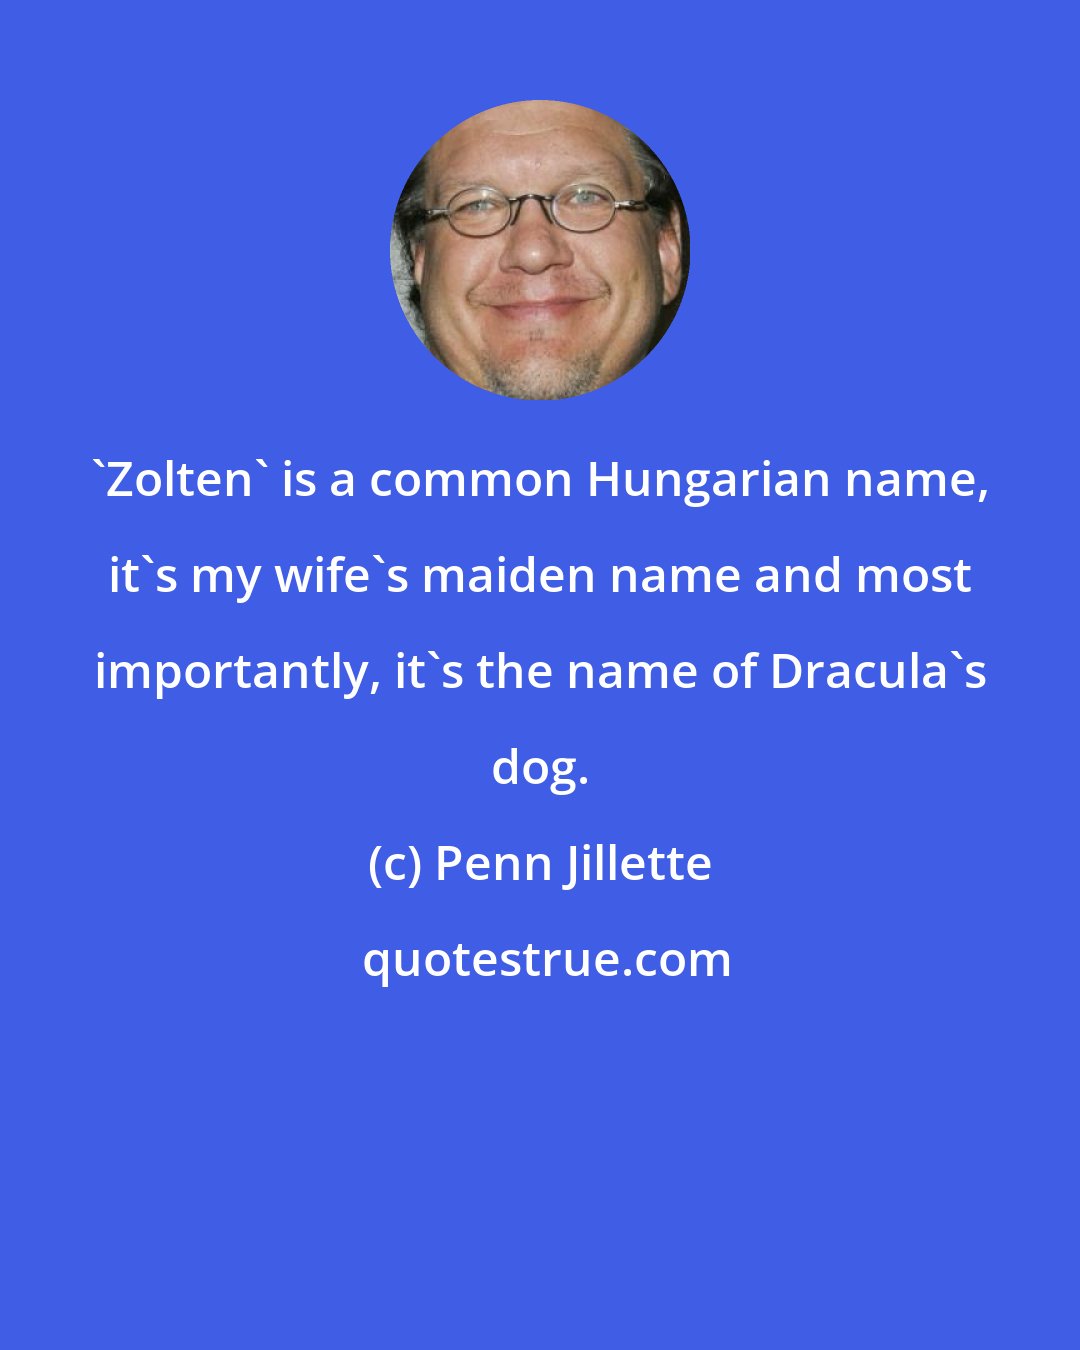 Penn Jillette: 'Zolten' is a common Hungarian name, it's my wife's maiden name and most importantly, it's the name of Dracula's dog.